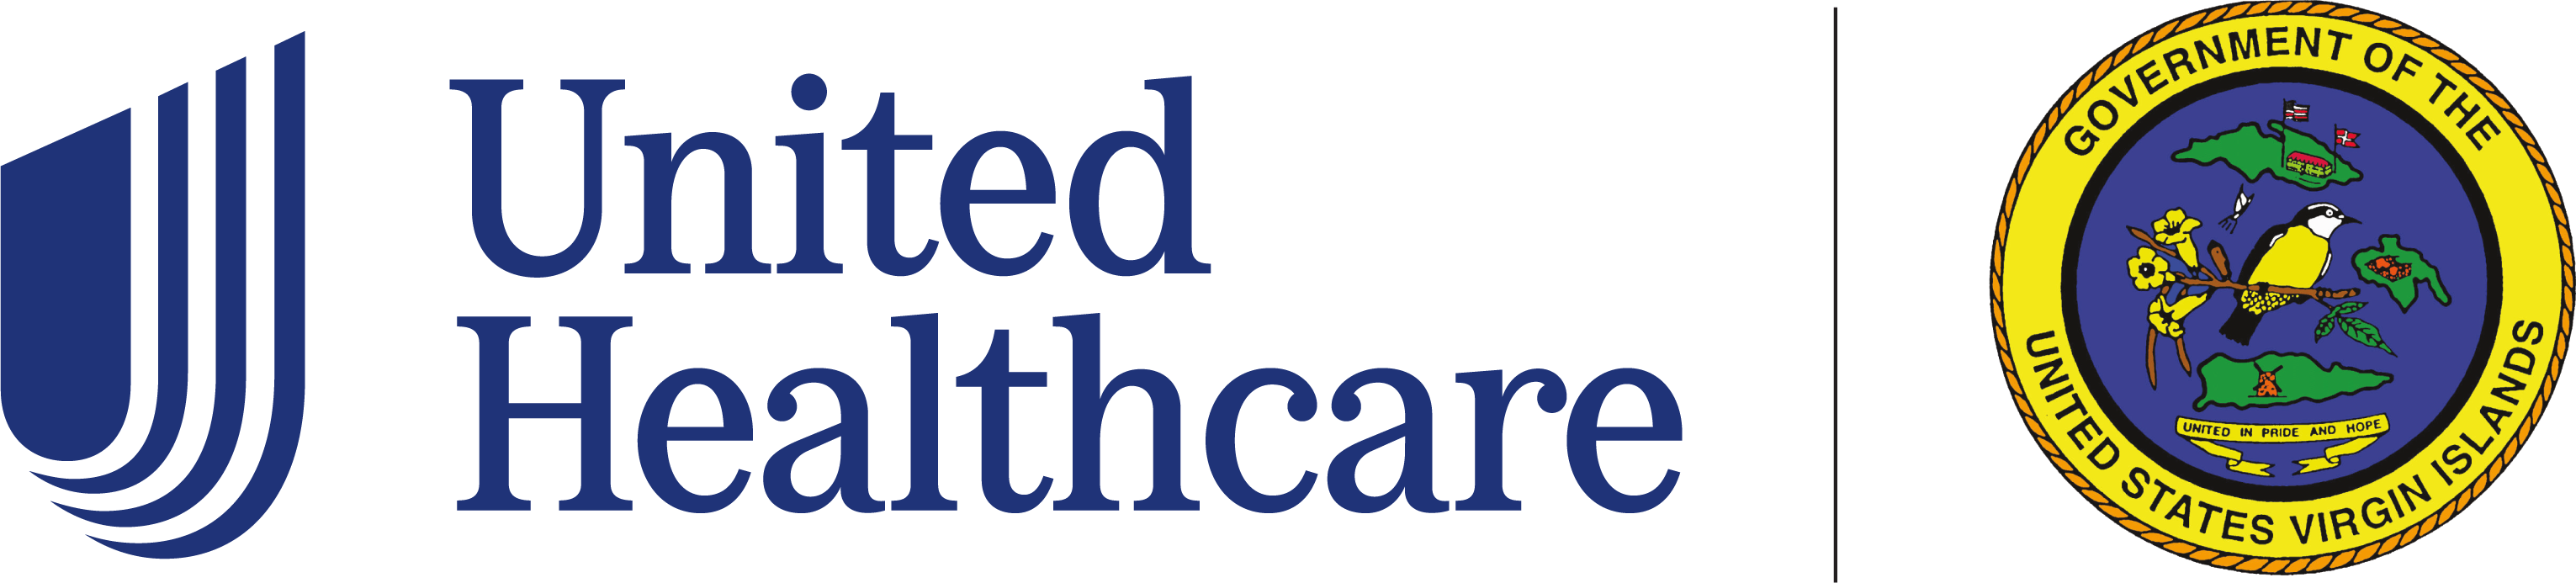 Healthy Benefits+ Sponsored by UnitedHealthcare